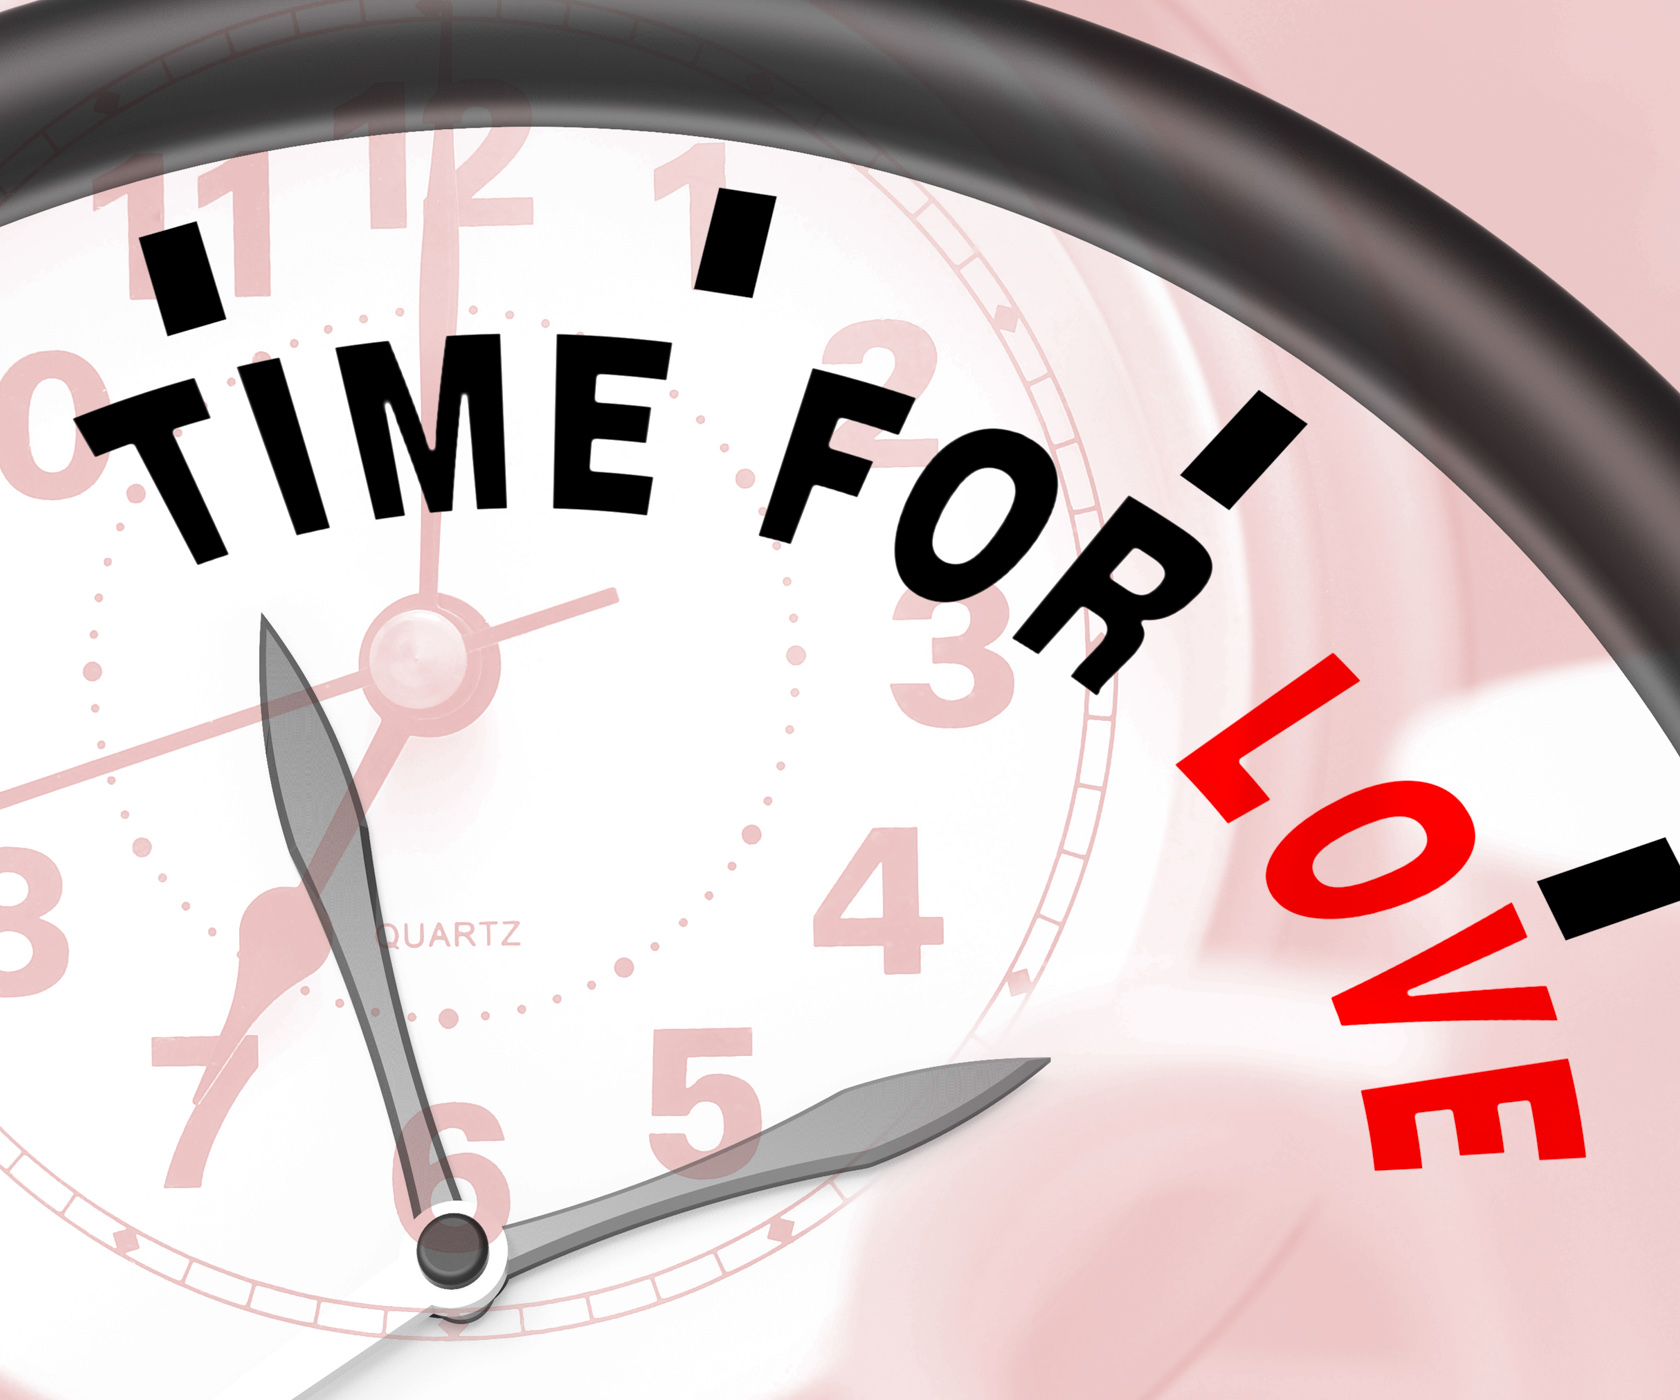 Time for love message shows romance and feelings photo